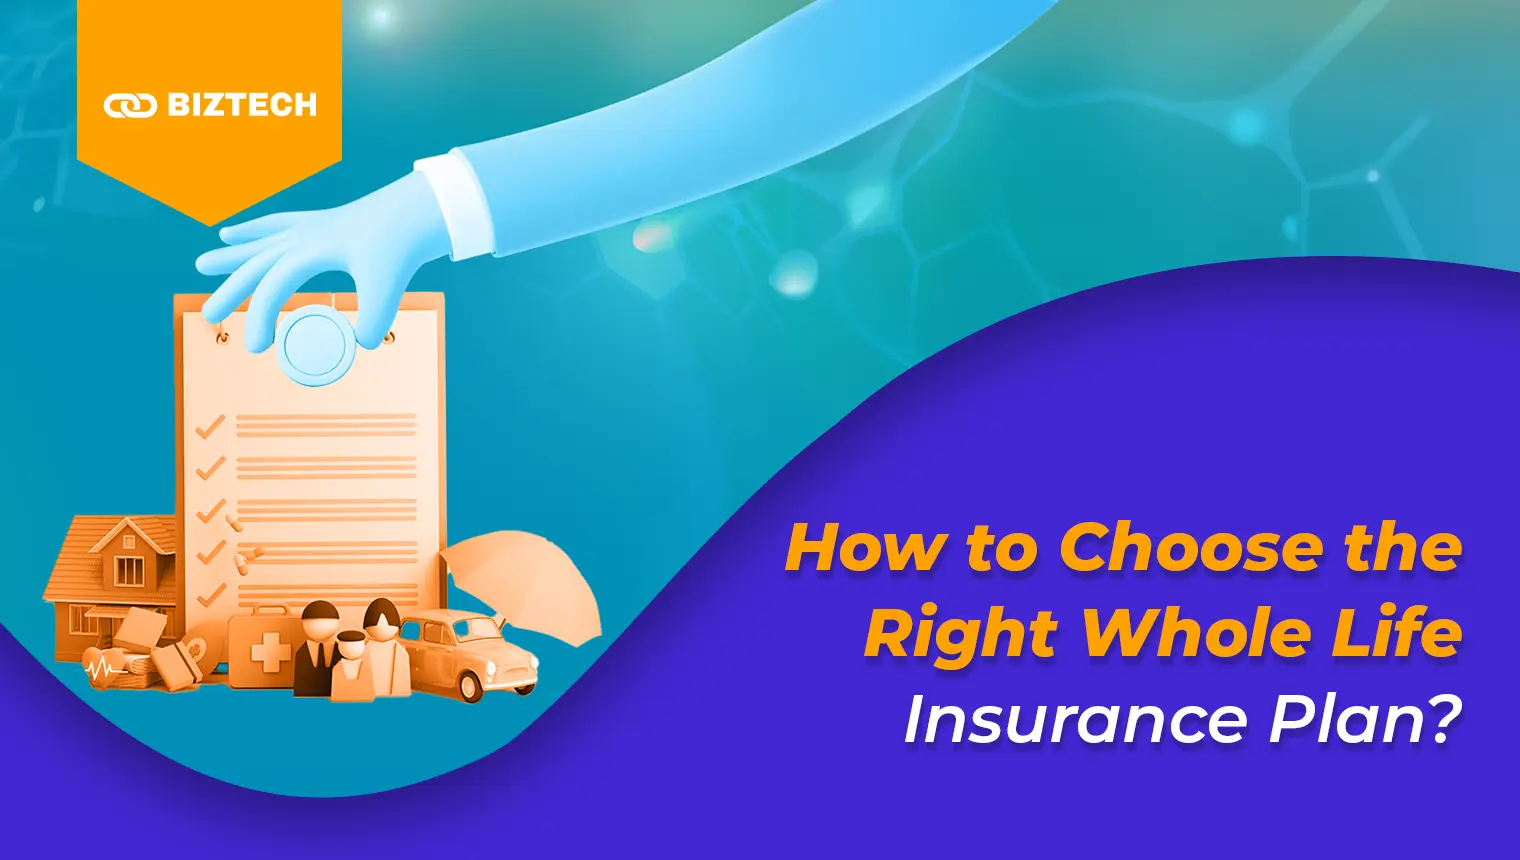 How to Choose the Right Whole Life Insurance Plan